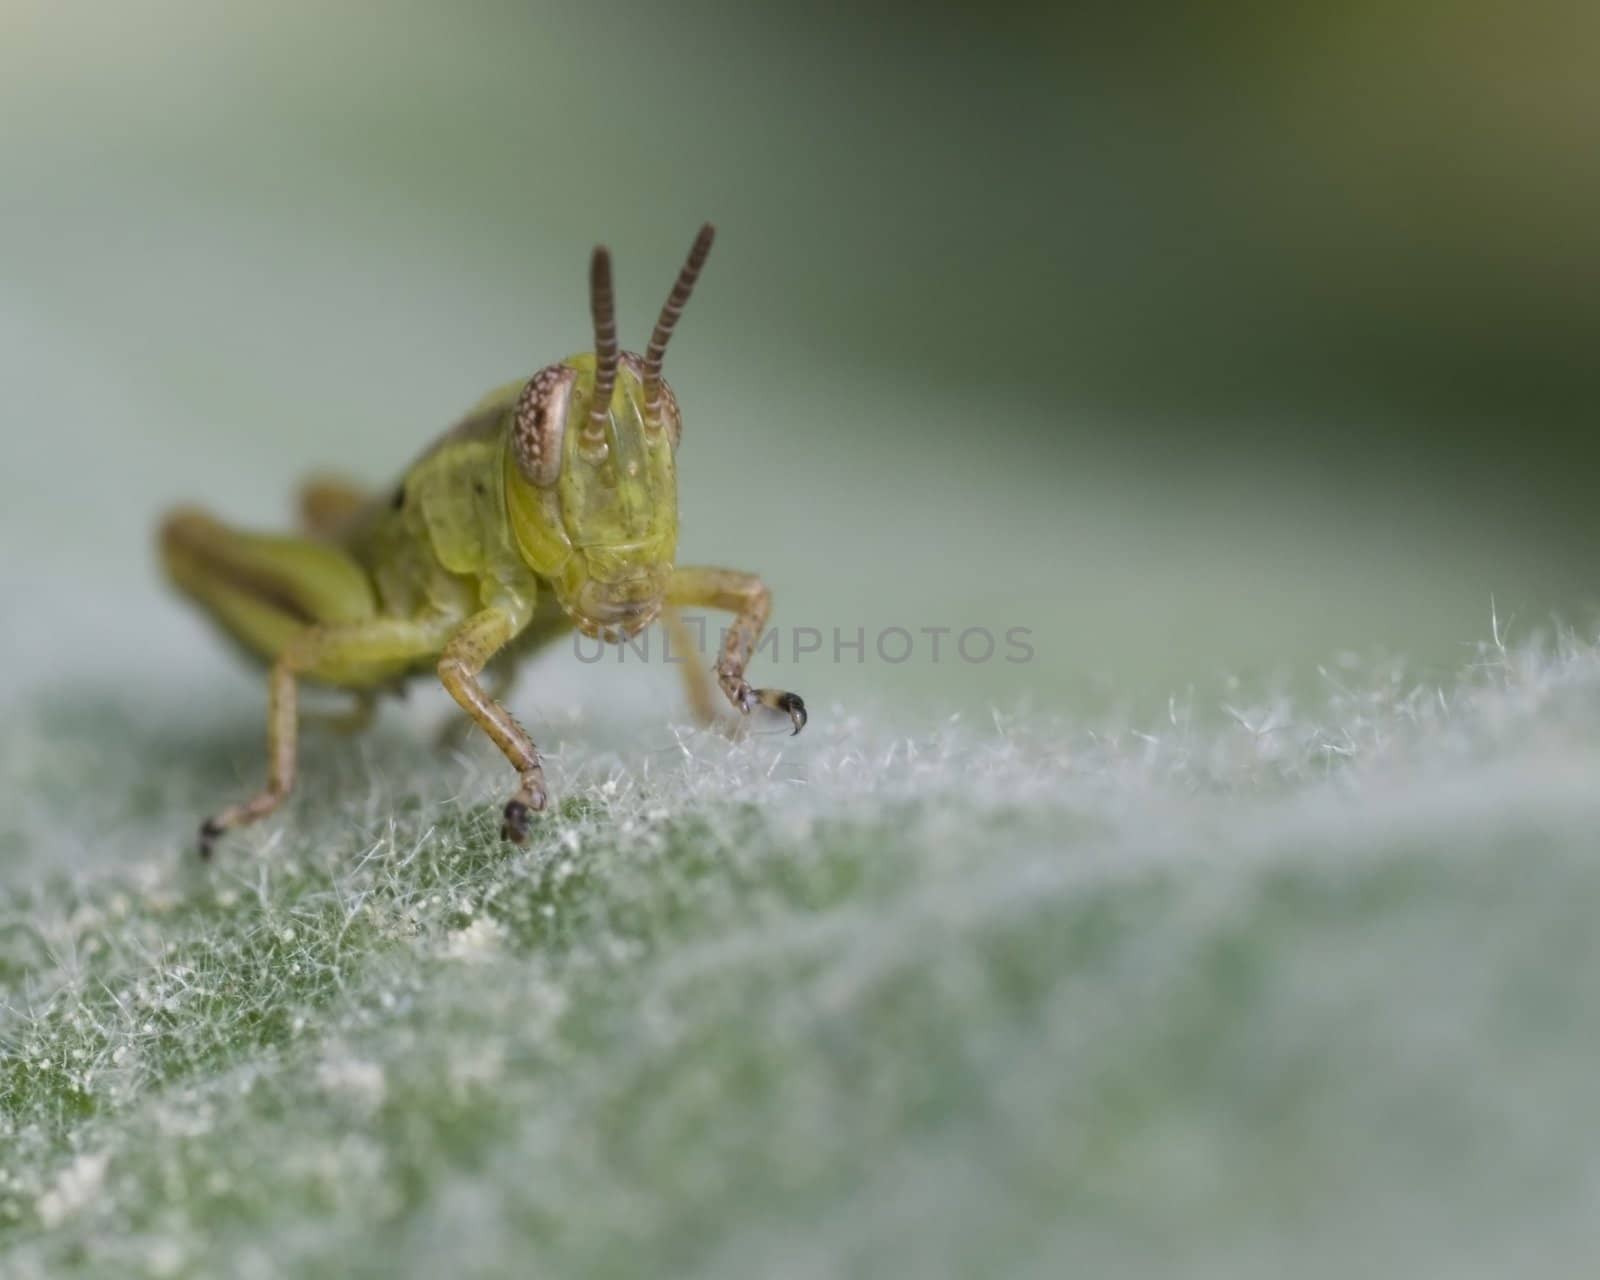 A young grasshopper perched on a plant.